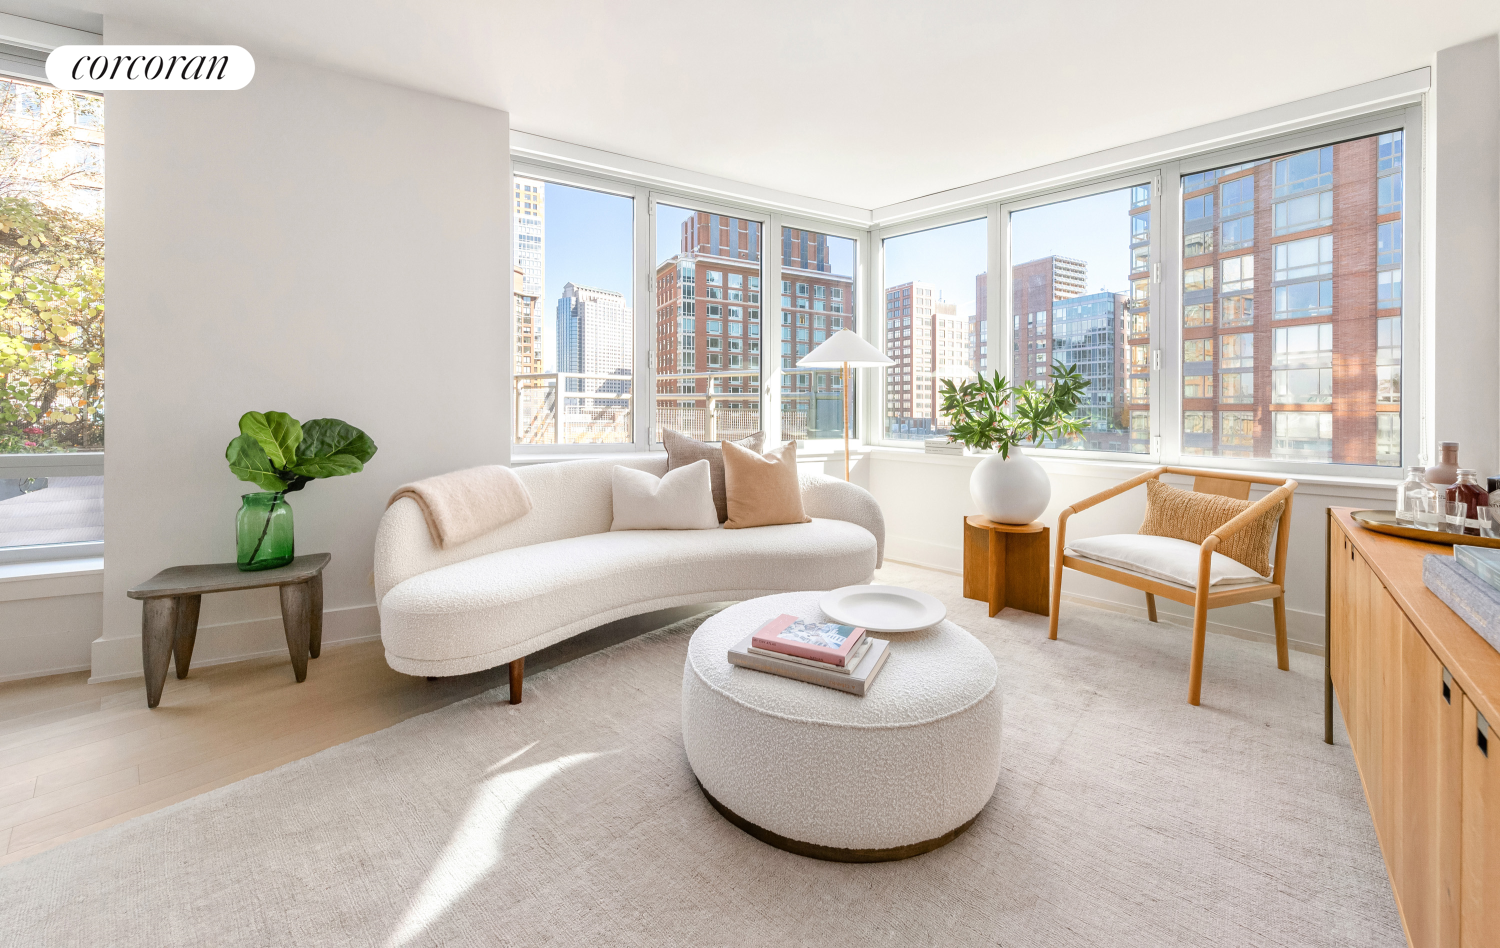 20 River Terrace 19A, Battery Park City, Downtown, NYC - 3 Bedrooms  
3 Bathrooms  
6 Rooms - 